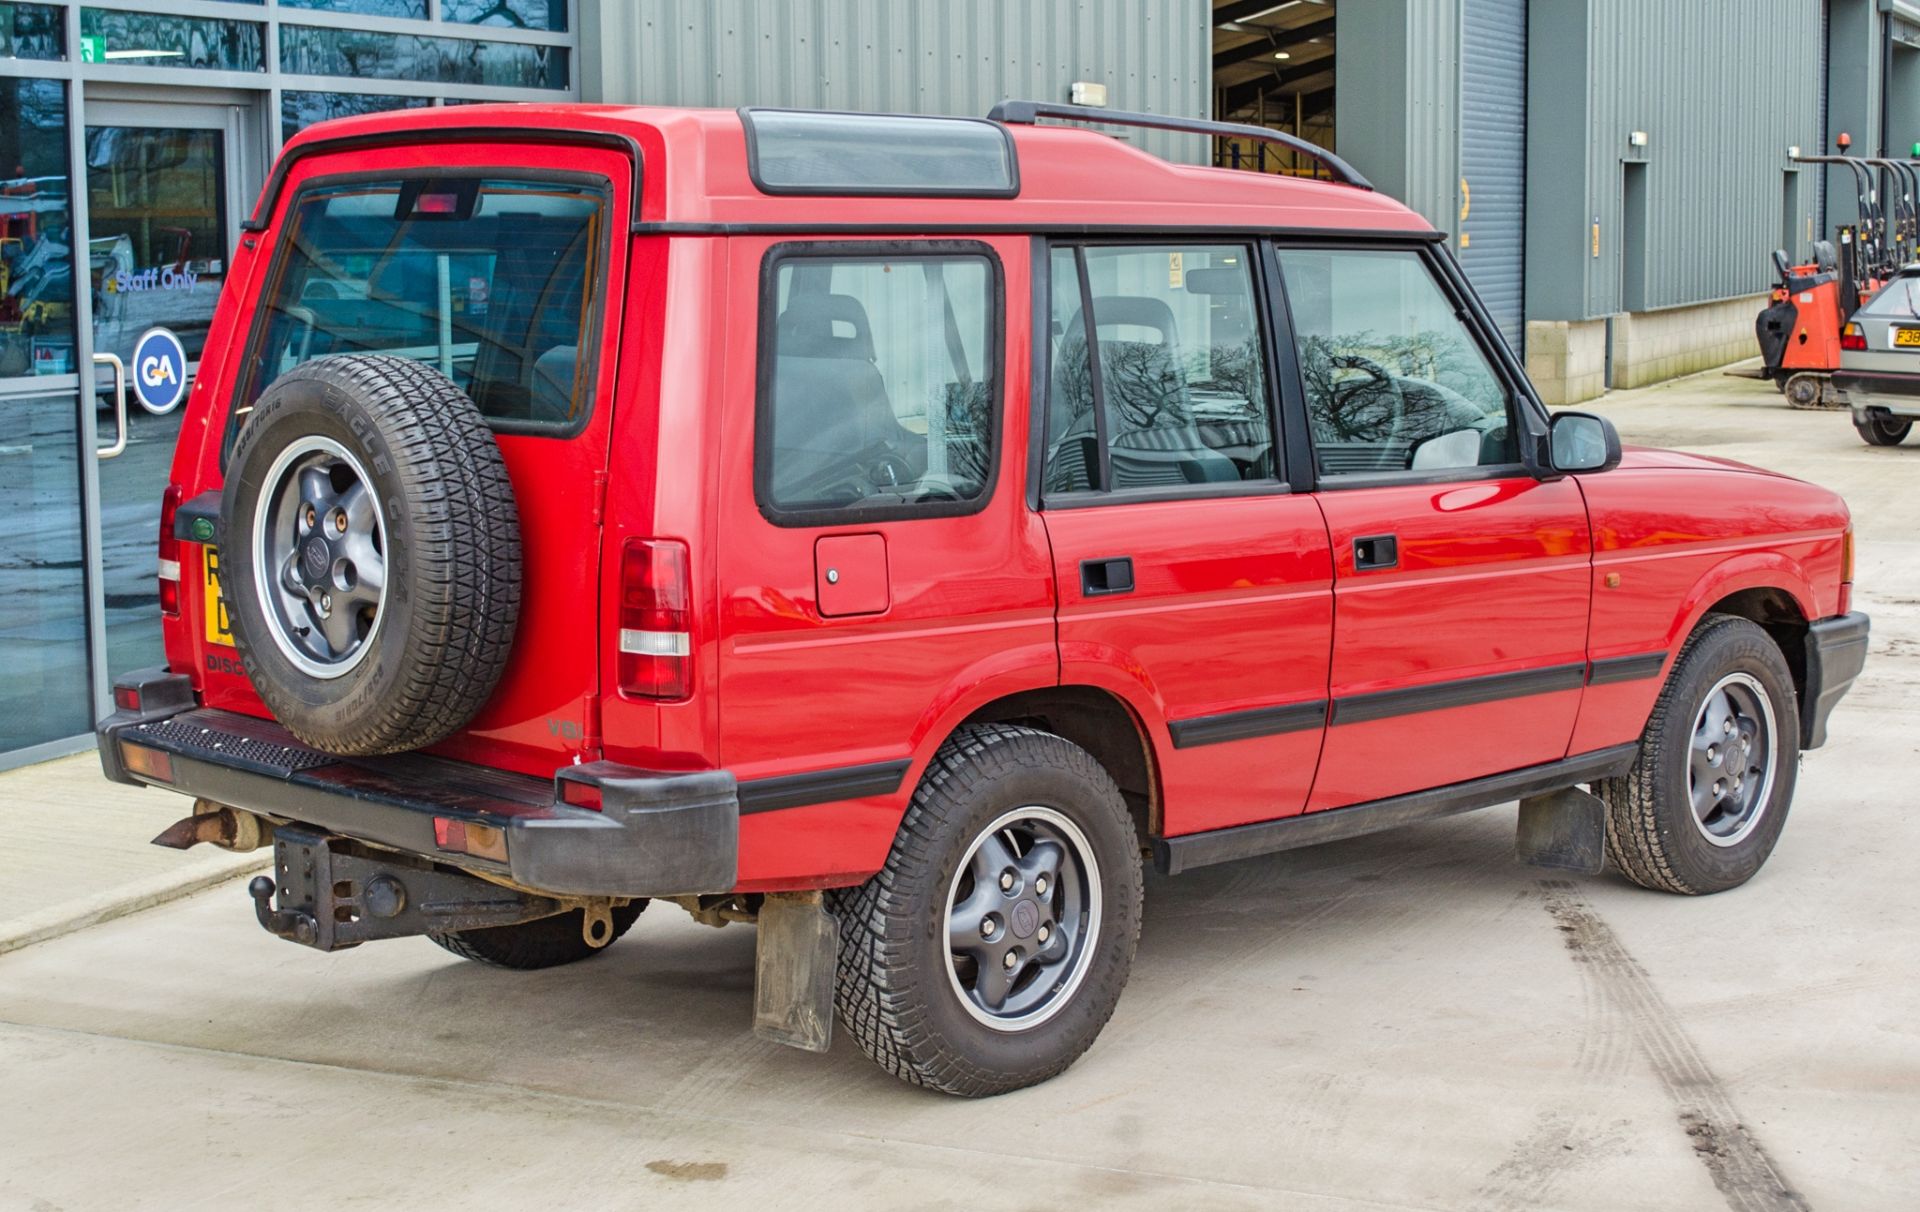 1998 Landrover Discovery 3.9 litre V8 manual 5 door 4wd - Image 6 of 46